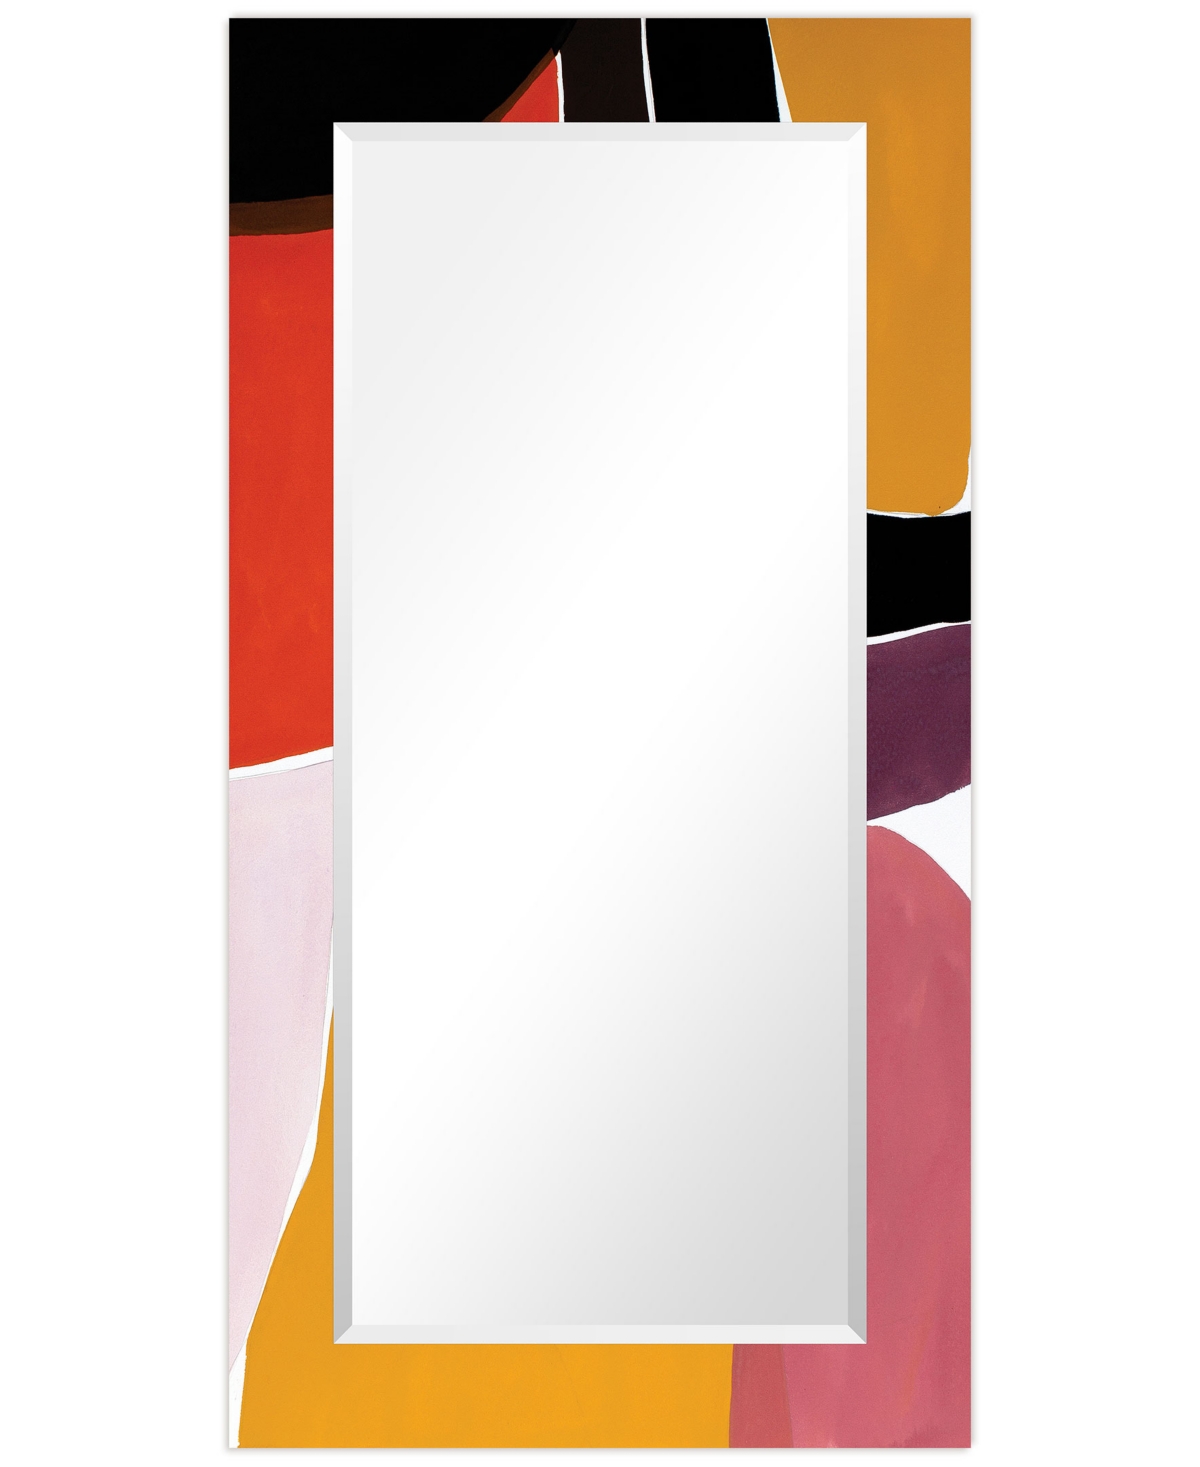 Empire Art Direct "melon-cholia Ii" Rectangular Beveled Mirror On Free Floating Printed Tempered Art Glass, 54" X 28" In Multi-color